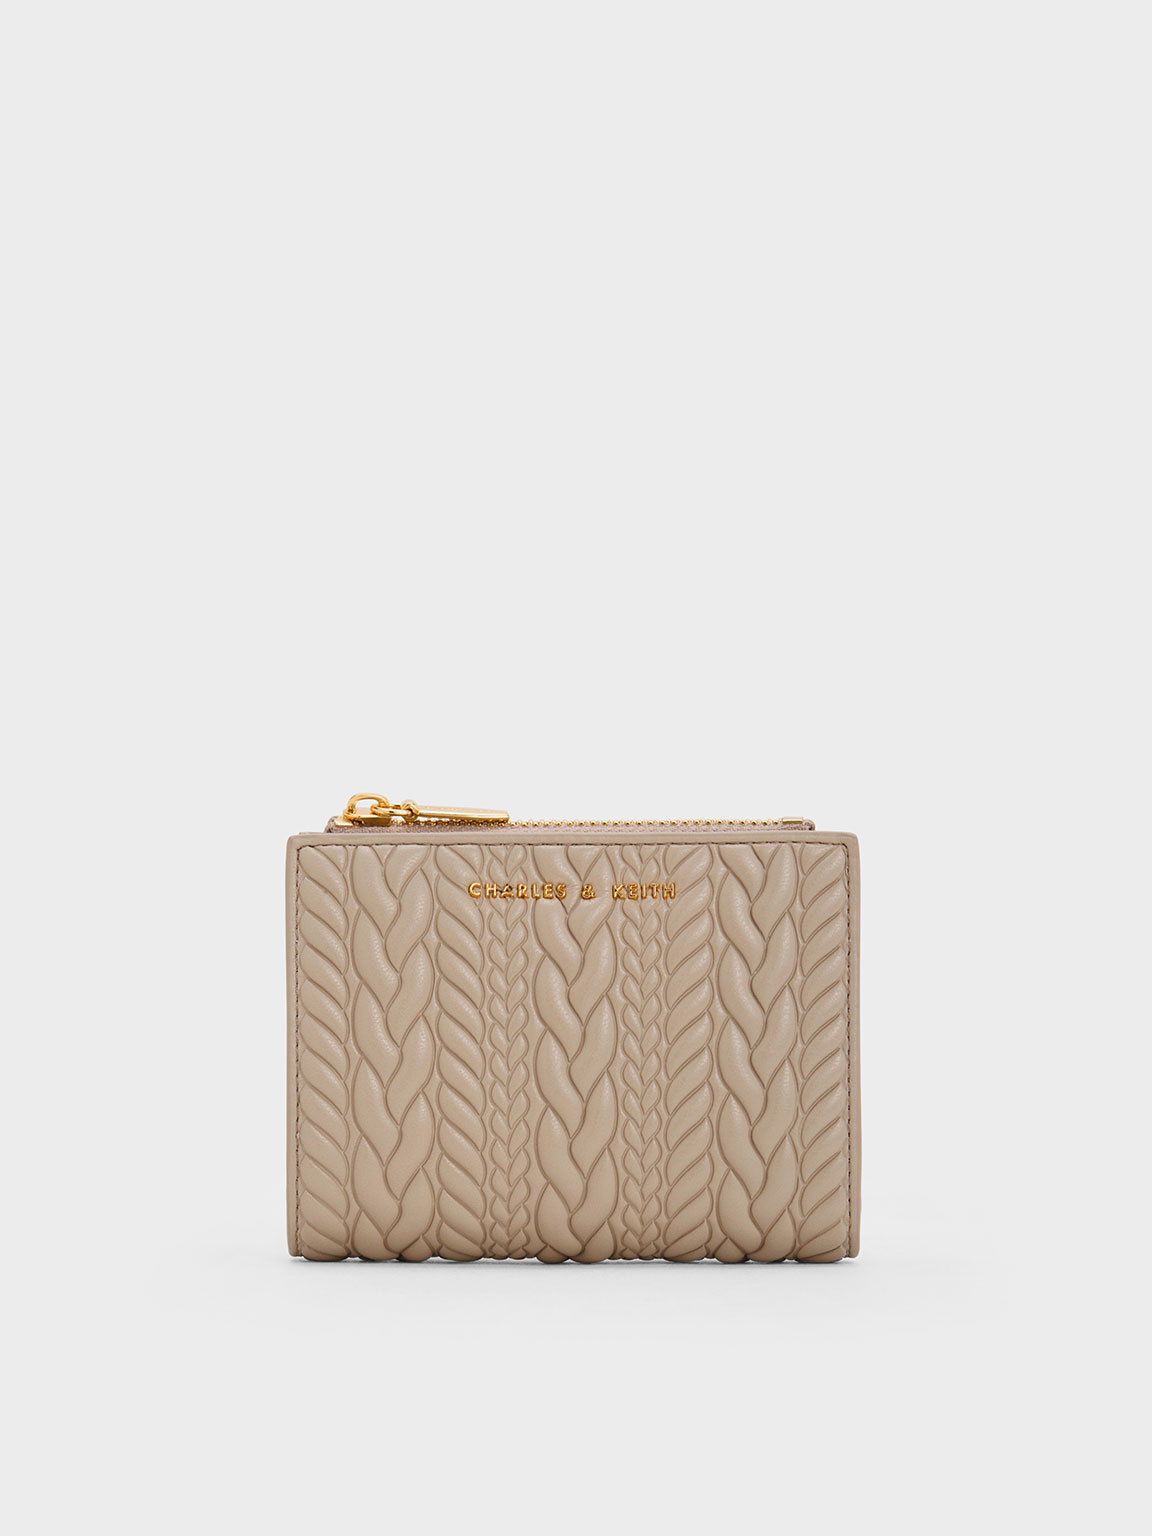 Charles & Keith Apolline Textured Top-zip Wallet In Taupe